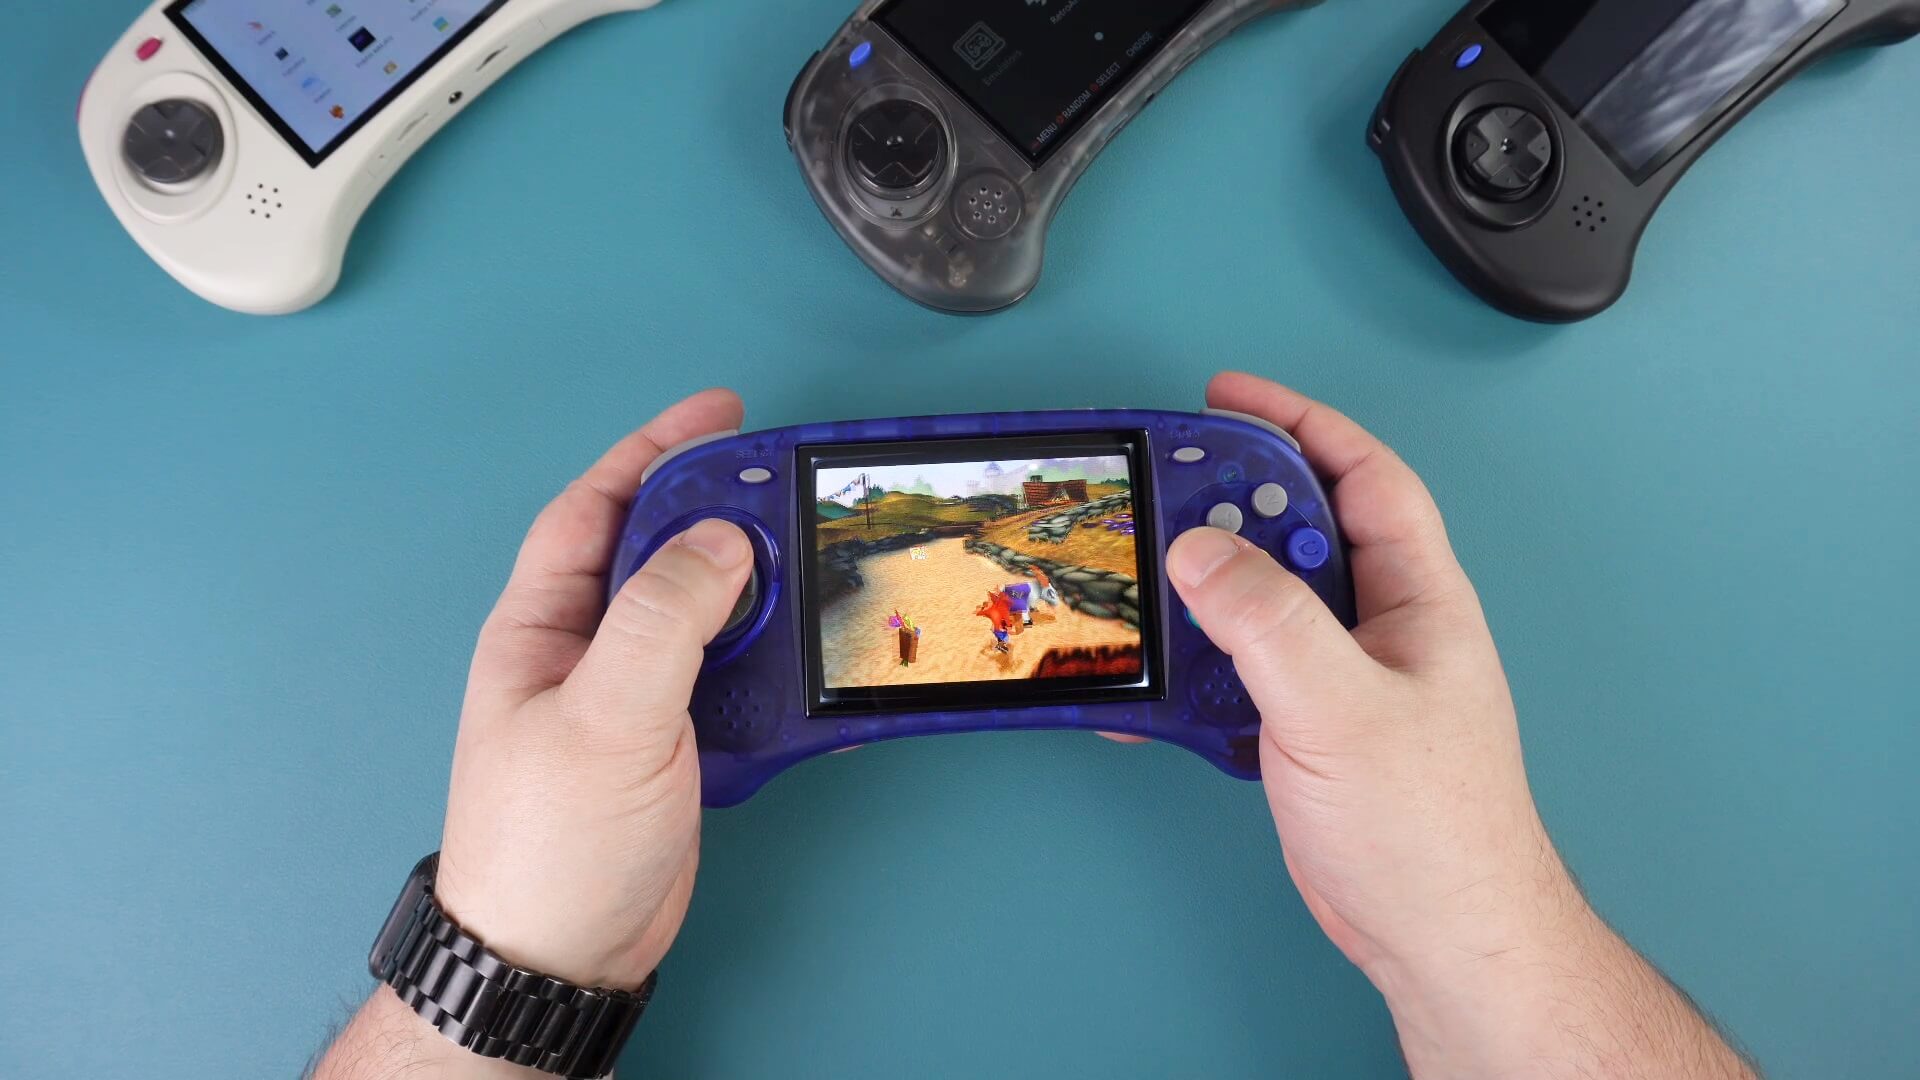 Anbernic RG ARC gaming handheld with a Sega Saturn-inspired design launched  - Gizmochina